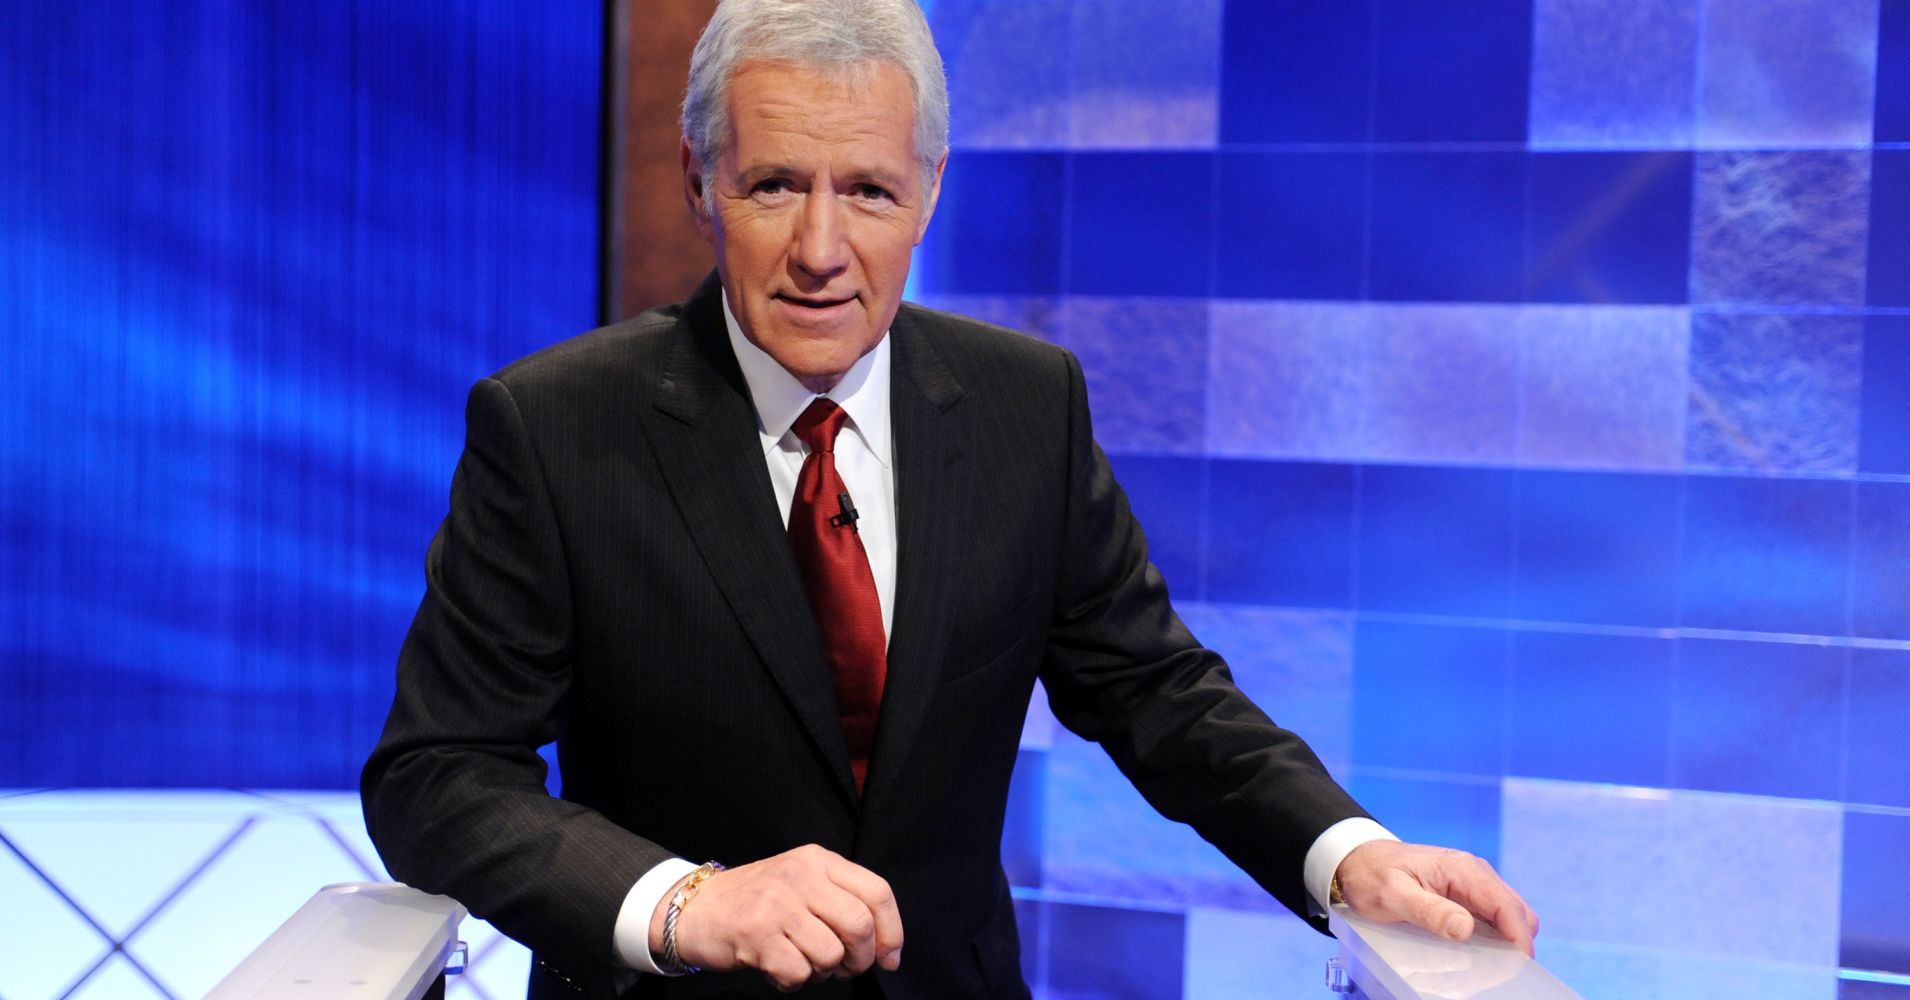 Game show host Alex Trebek poses on the set of the 'Jeopardy!' Million Dollar Celebrity Invitational Tournament Show Taping on April 17, 2010 in Culver City, California.